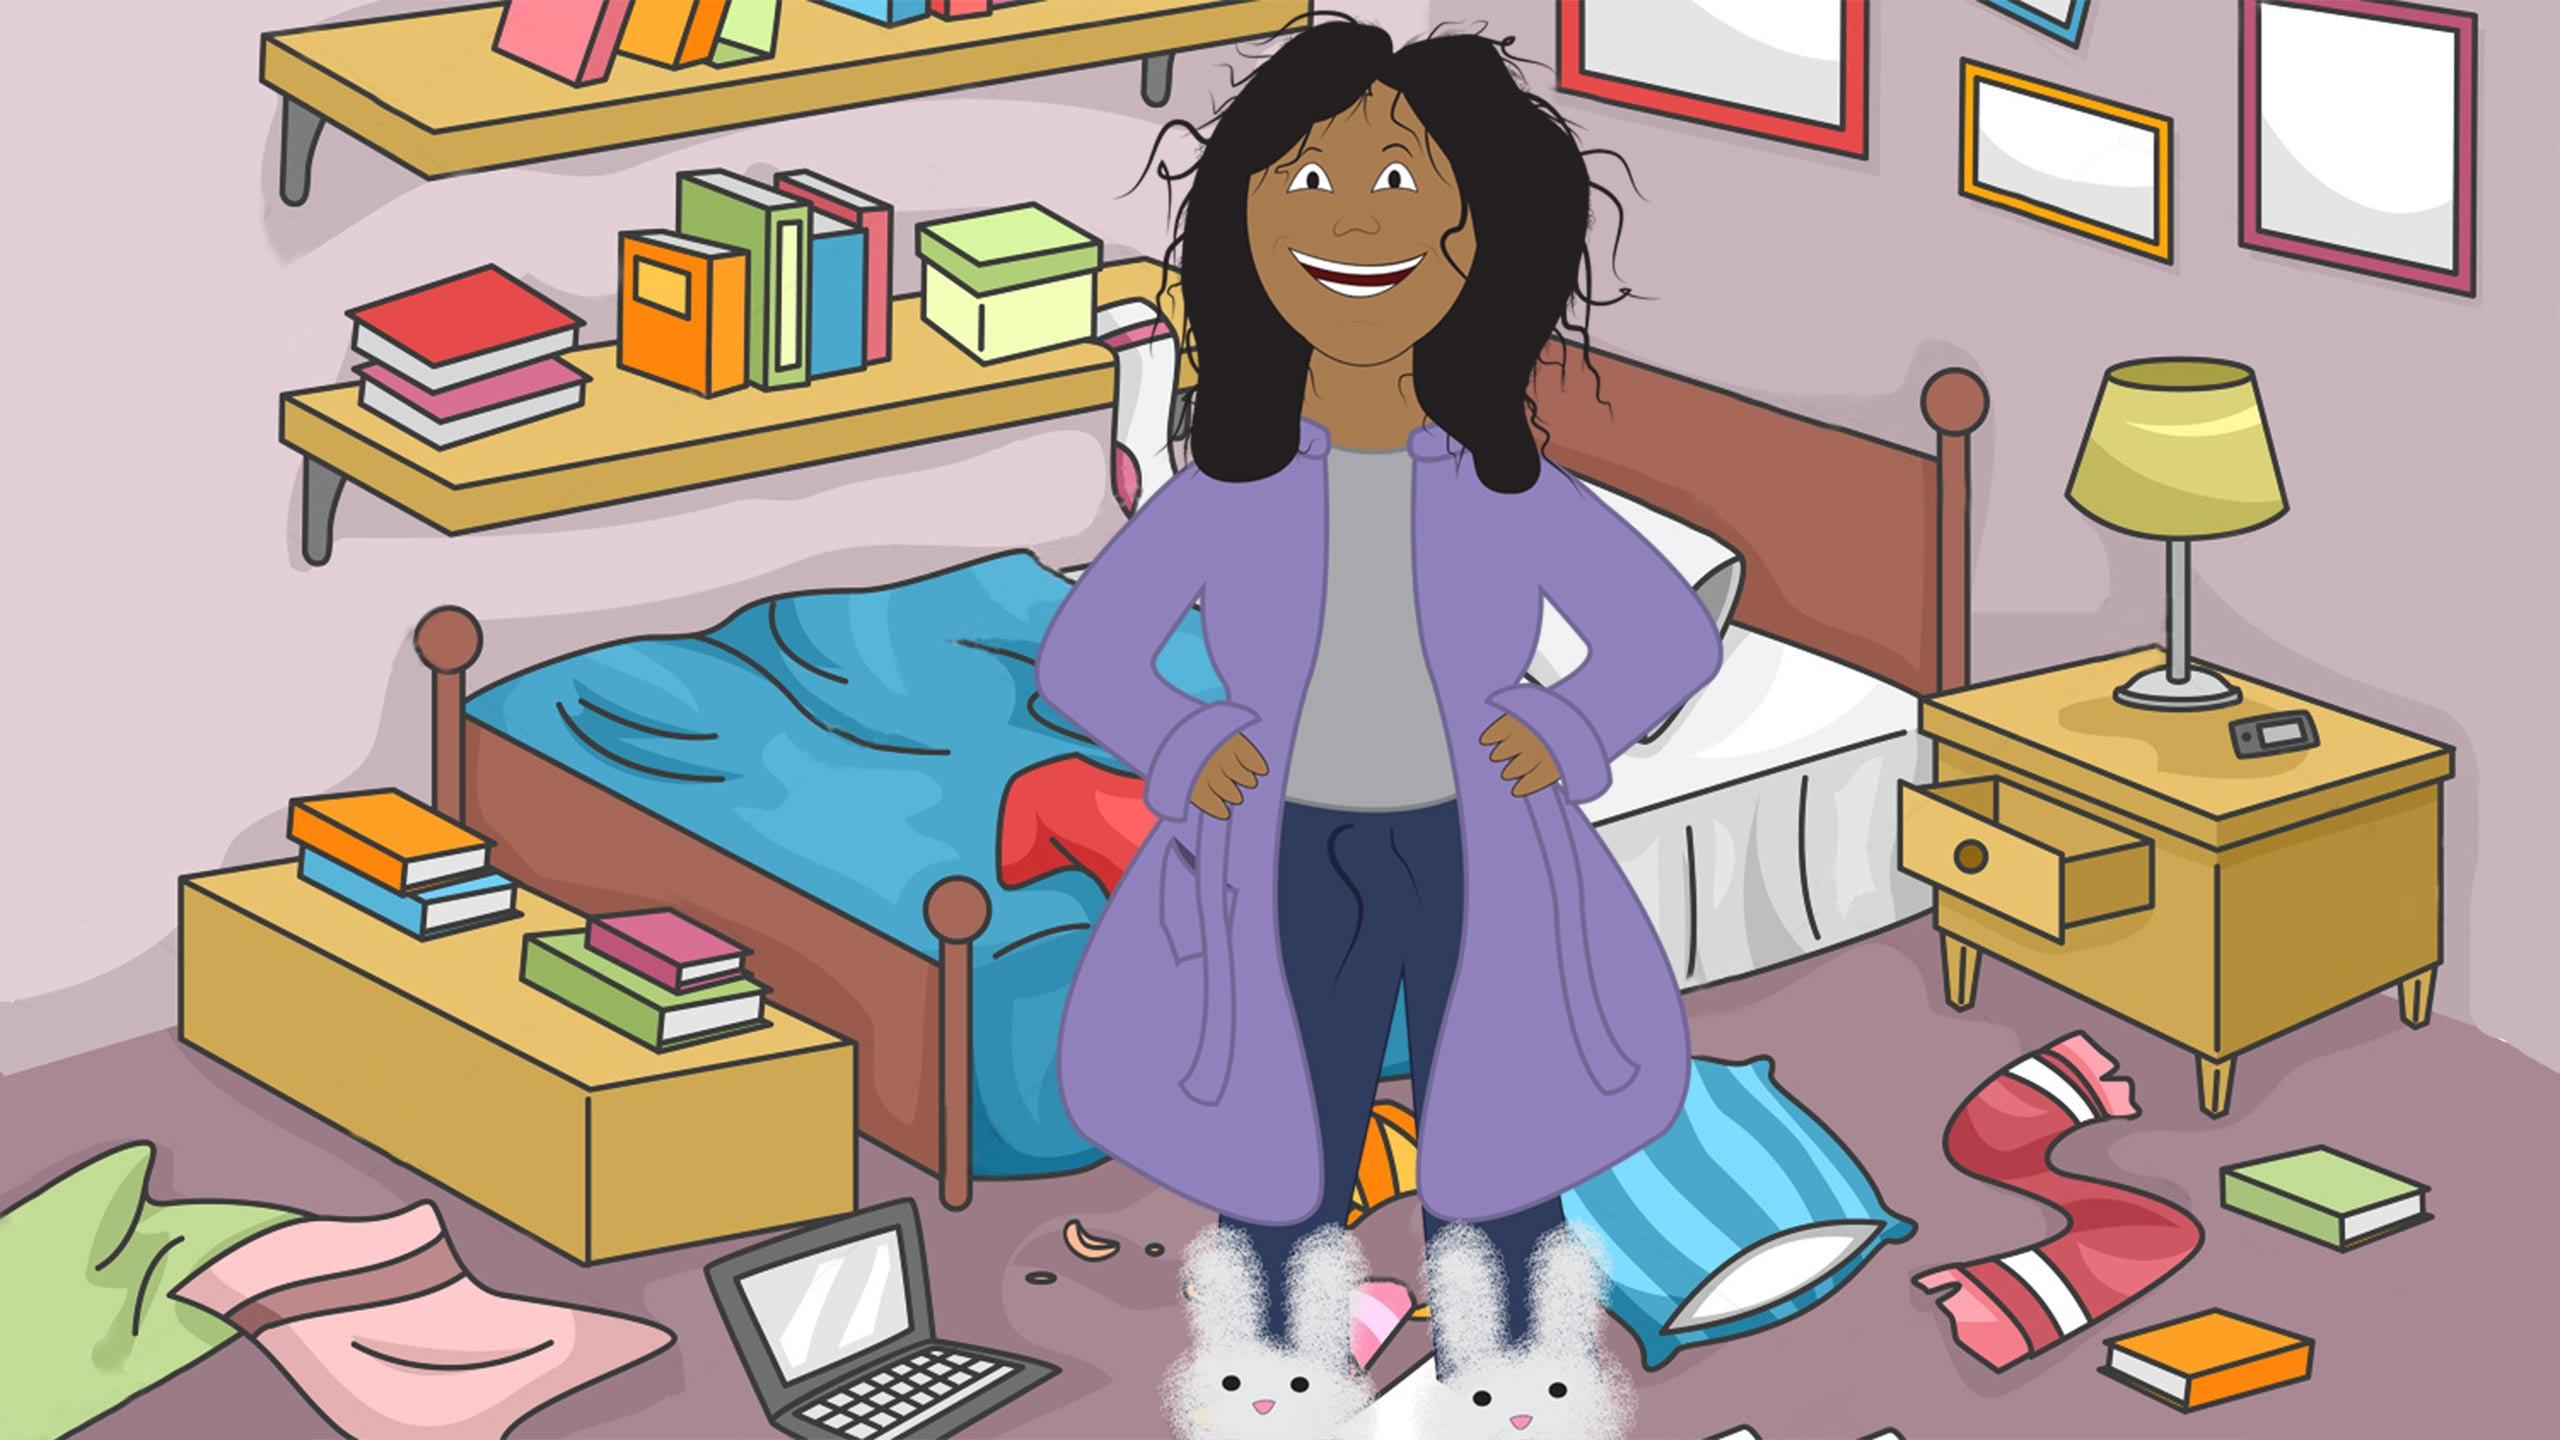 An illustration of a girl with messy hair in a messy bedroom